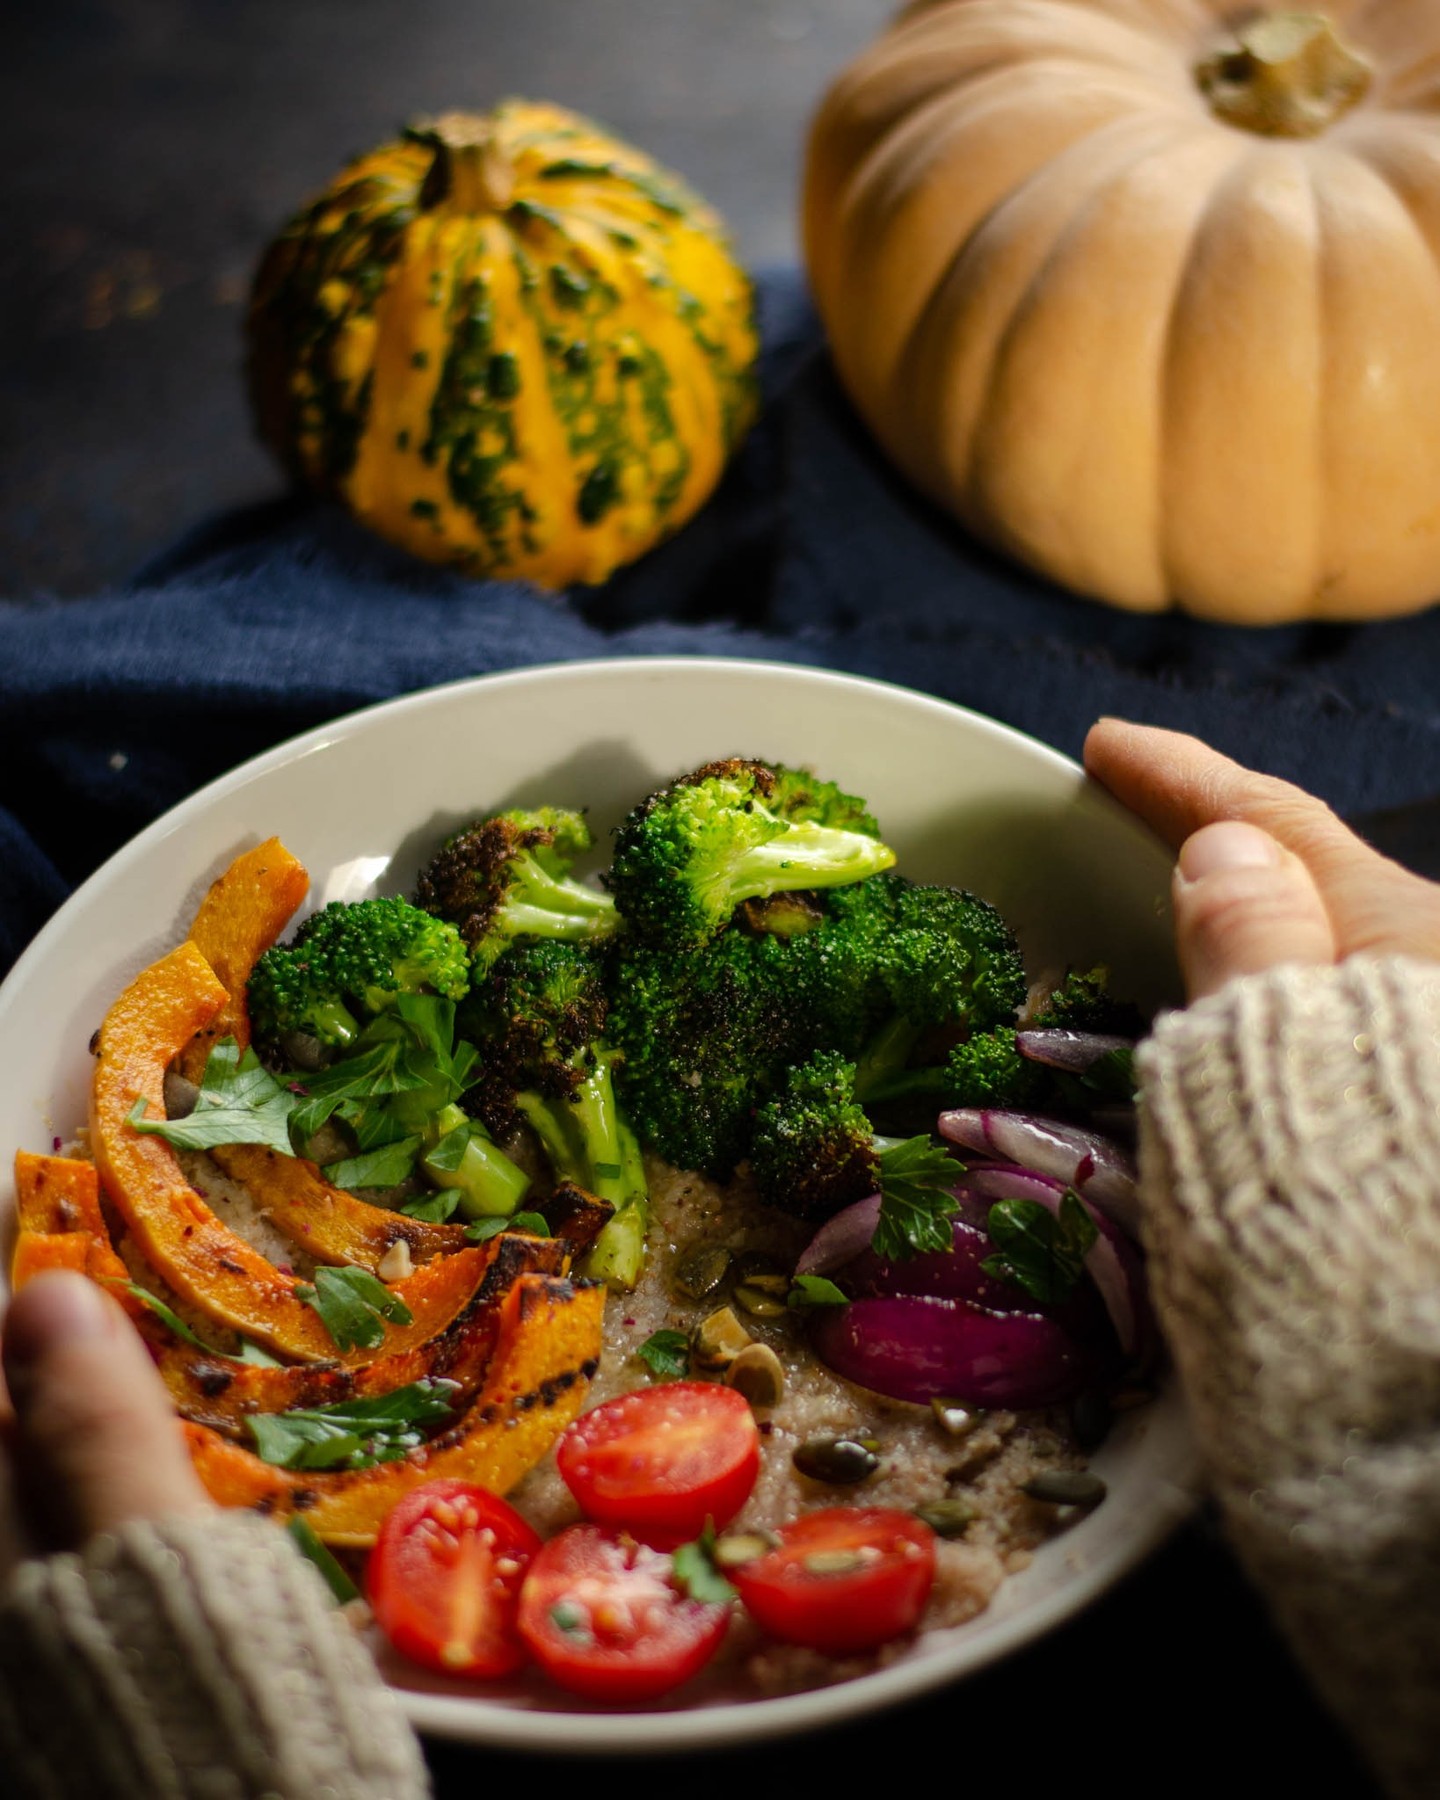 Autumn budha bowl with couscous, roasted pumpkin and brocolli

my entry to:
’get cosy’ challenge by
@createaplatephotography @casadelavida.nl #foodanditsseasons
@studiove_food as judges and @healthygoodiesbylucia @fodory.com @twinsinmykitchen

“Shades of fall in food photography” hosted by @bewellrecipe judged by @my_romantic_kitchen_stories and sponsored by @poppybeesurfaces.

" Seize the day" #mymoodymonday @slow.food.studio @mine.table @lucrequesada

"Open Theme" #foodphotobiteswithritu @happytummybyritumbhara
@foodphotobiteswithritu @vegansugarspoon @blablafoodz_prop_store

@hautescuisines @foodthe8thart @foodartclick_ @fotograficamentefoodstyle @food52 @9vaga_food9 @creativelysquared @foodelia @still_life_gallery_ @foodartproject @foodphotoaward @foodfluffer

#vegan #vegetarian #autumnvibes🍁 #still_life_mood #changingseasons #foodartblog #still_life_gallery #seasonalsimplicity #onvtable #aseasonaĺshift #f52grams #chasinglight #moodygrams #foodartblog #foodblogfeed #food52 #feedfeed #foodstyling #hygge #foodblogfeed #tastingtable #momentslikethese #tastemade #food52grams #yourstomake
#broccoli #pumpkin #bowl #budhabowl